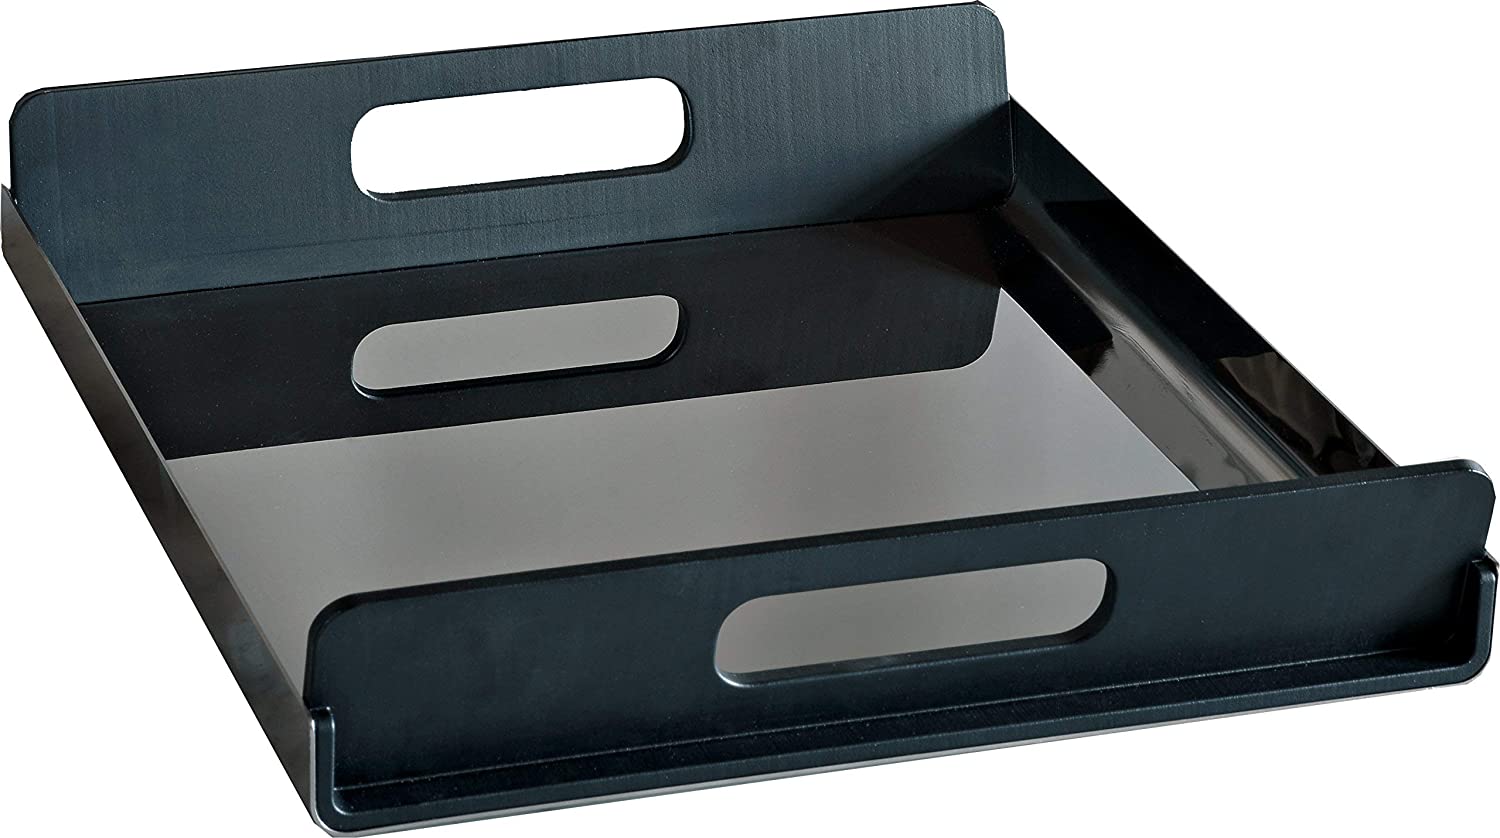 Alessi Vassily 45 cm Rectangular Tray in 18/10 Stainless Steel Mirror Polished with Handles in Black Thermoplastic Resin